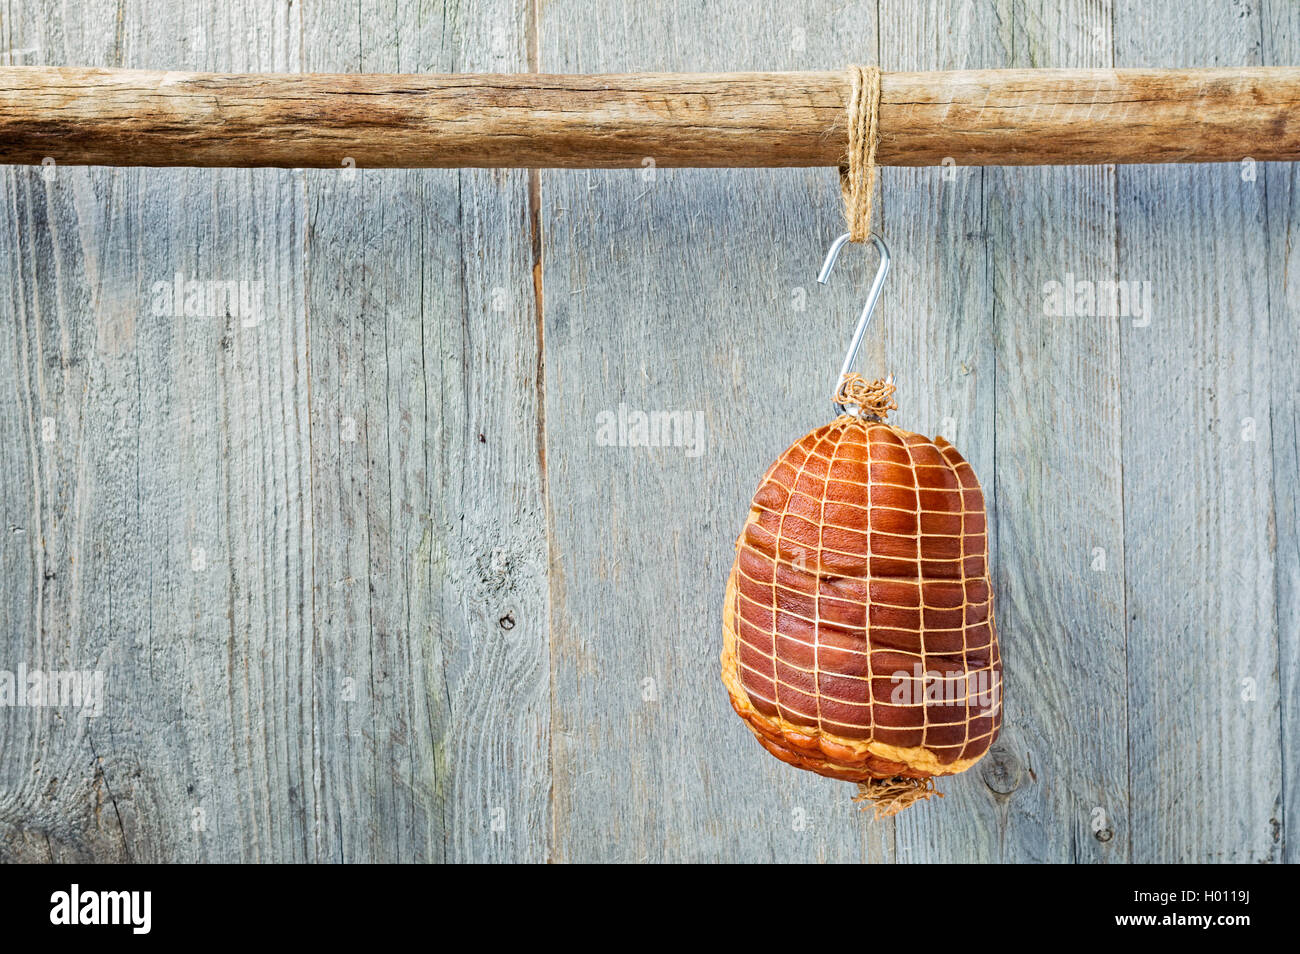 Smoked boneless pork ham hock wrapped in netting hanging on a hook from a wooden pole with a weathered wood background Stock Photo